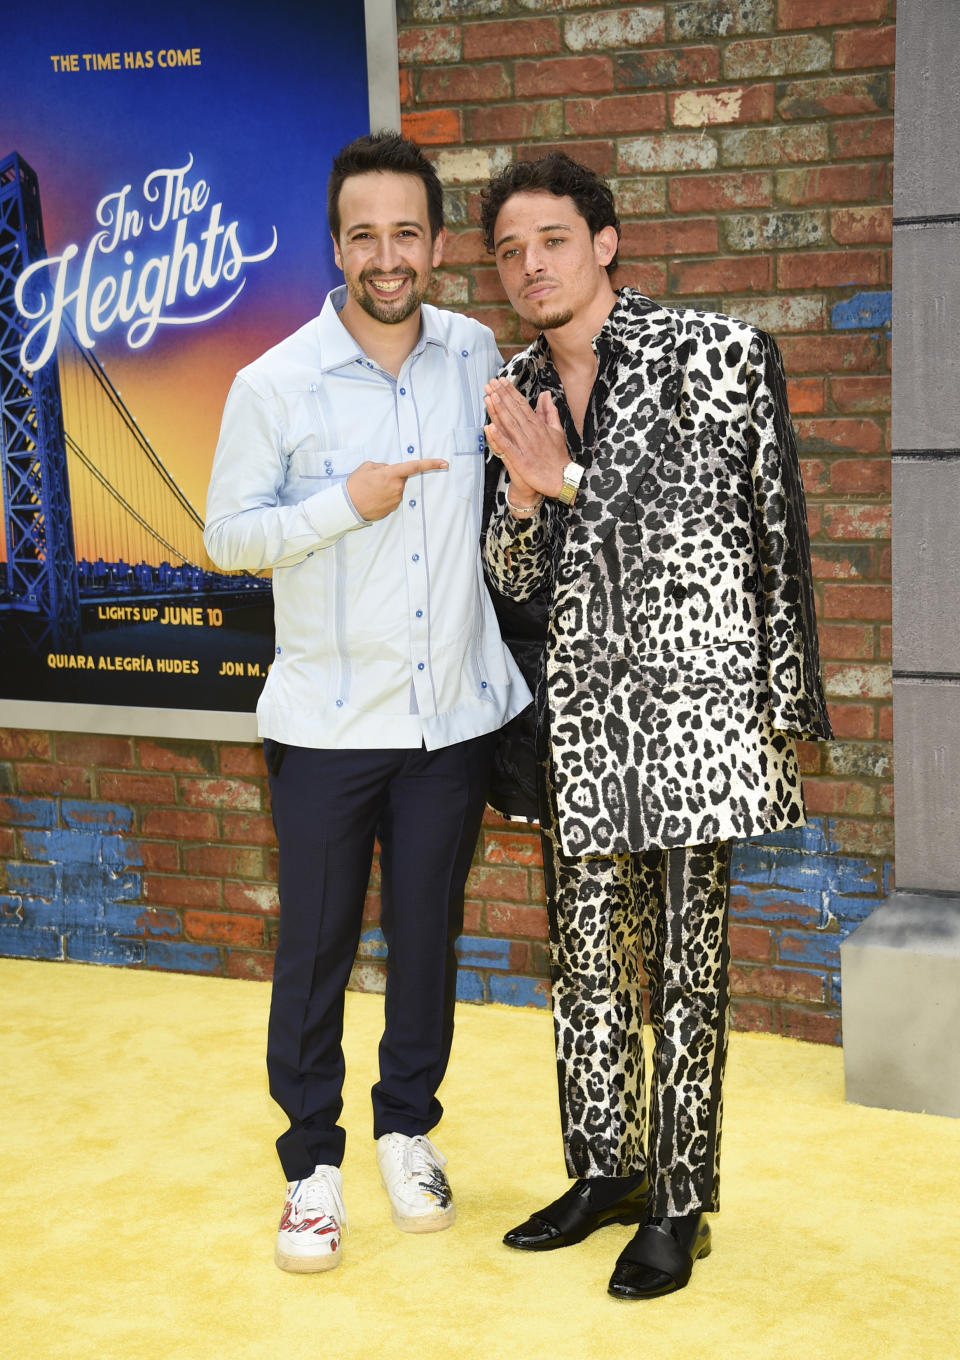 Producer Lin-Manuel Miranda, left, and actor Anthony Ramos pose together at the 2021 Tribeca Film Festival opening night premiere of "In The Heights" at the United Palace theater on Wednesday, June 9, 2021, in New York. (Photo by Evan Agostini/Invision/AP)